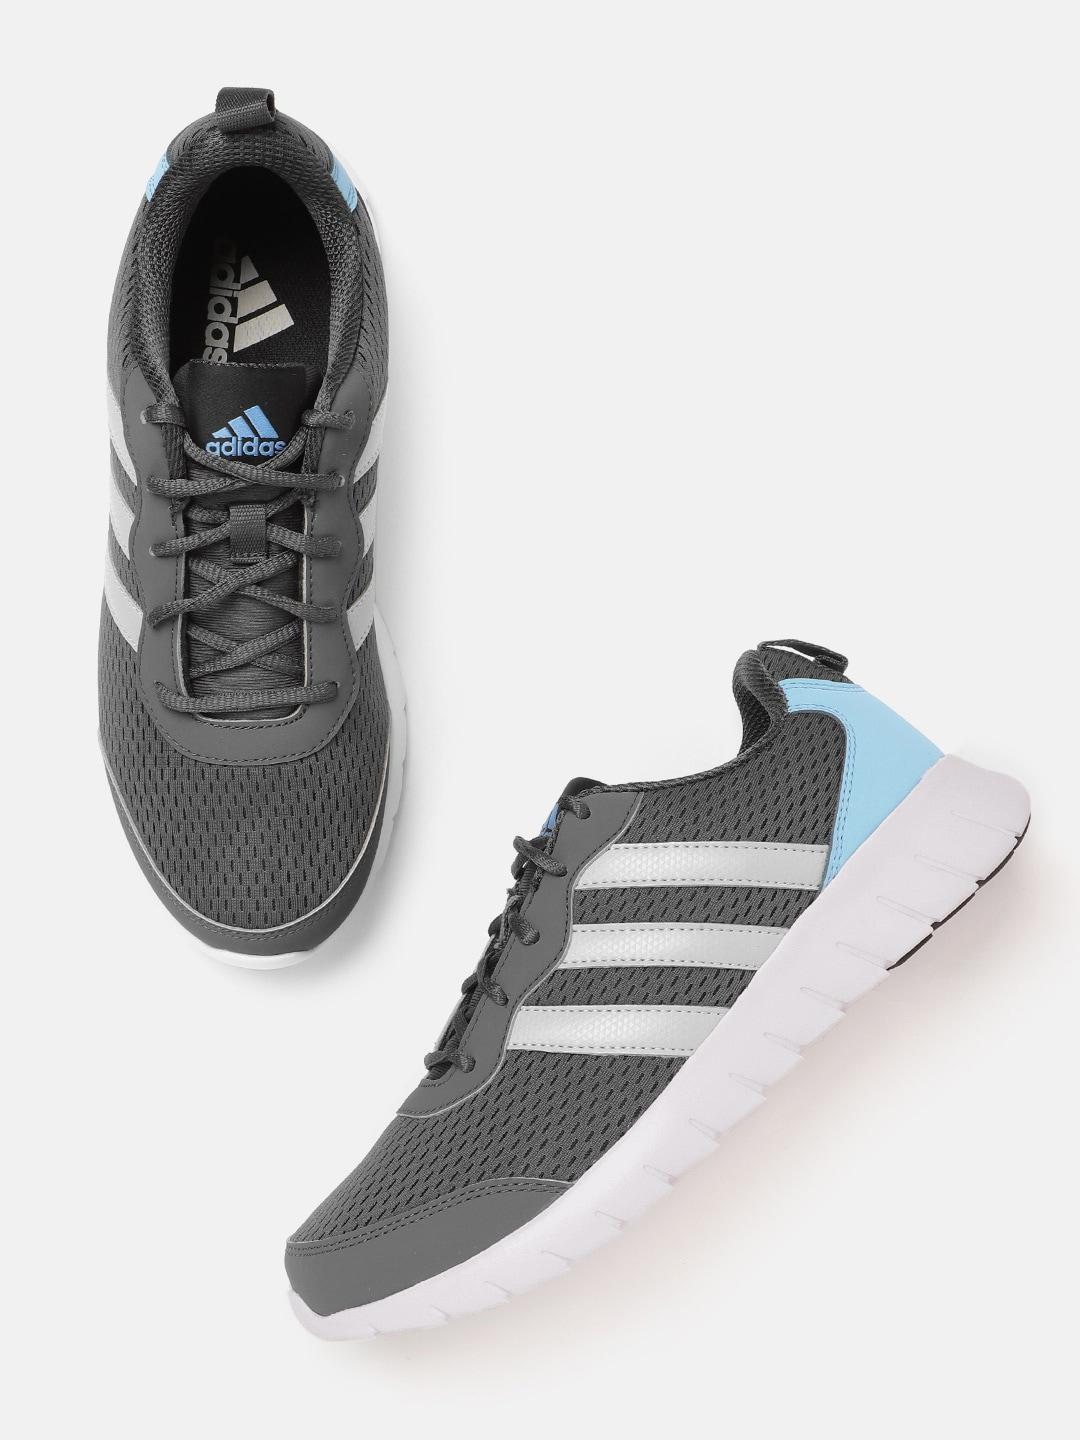 ADIDAS Men Charcoal Grey & Blue Woven Design Uiflow Running Shoes